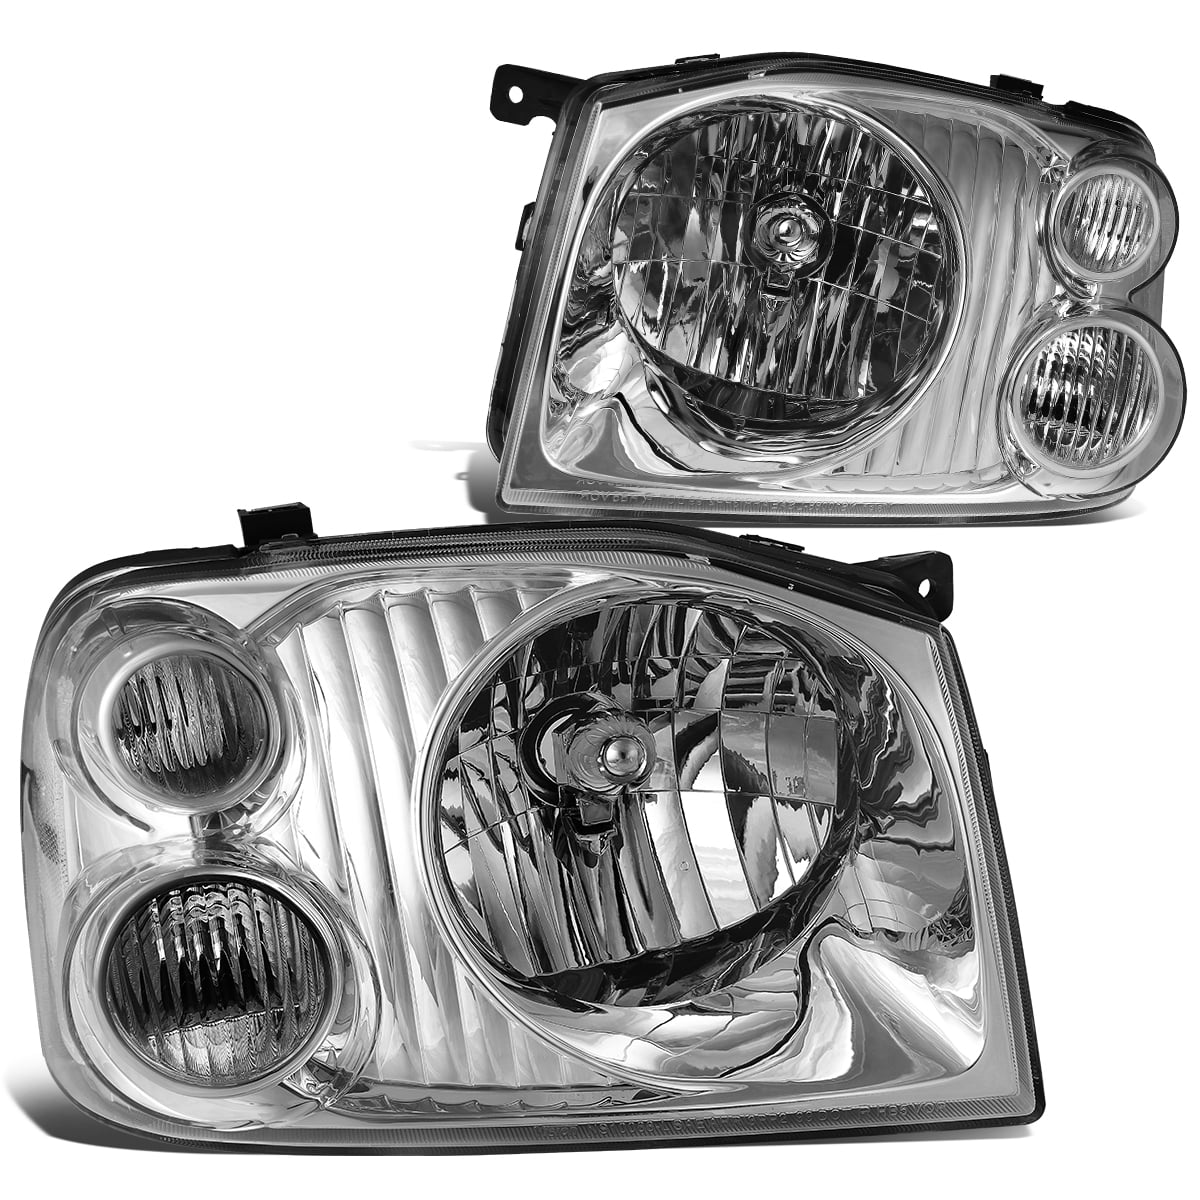 For 01-04 Nissan Frontier DNA Motoring HL-OH-074-BK-CL1 Pair of Headlight 